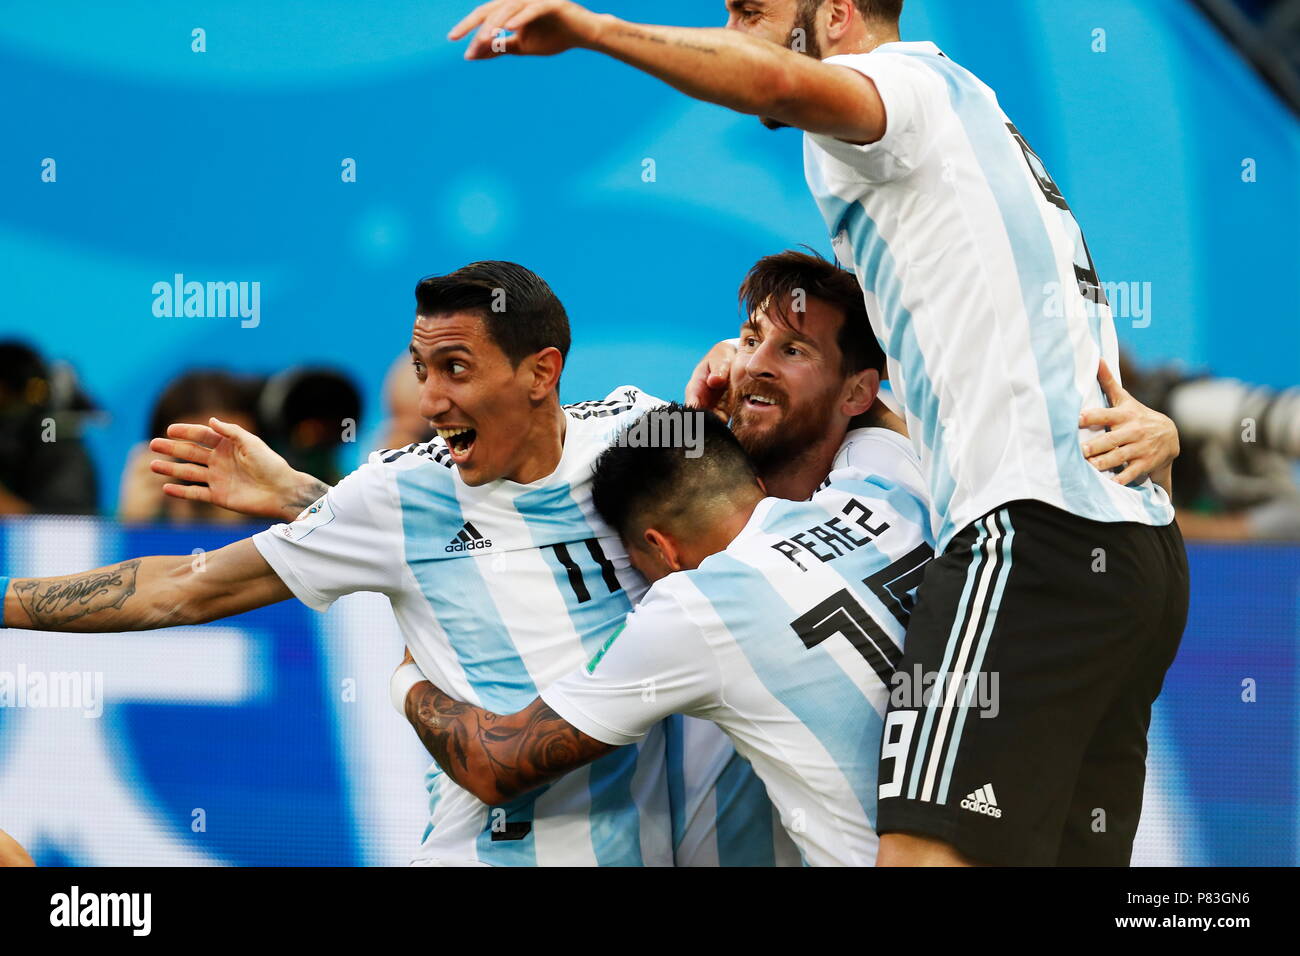 Saint Petersburg, Russia. 26th June, 2018. Lionel Messi (ARG) Football/Soccer : Messi and his team players celebrate after his goal on FIFA World Cup Russia 2018 match between Nigeria 1-2 Argentina at the Saint Petersburg Stadium in Saint Petersburg, Russia . Credit: Mutsu KAWAMORI/AFLO/Alamy Live News Stock Photo